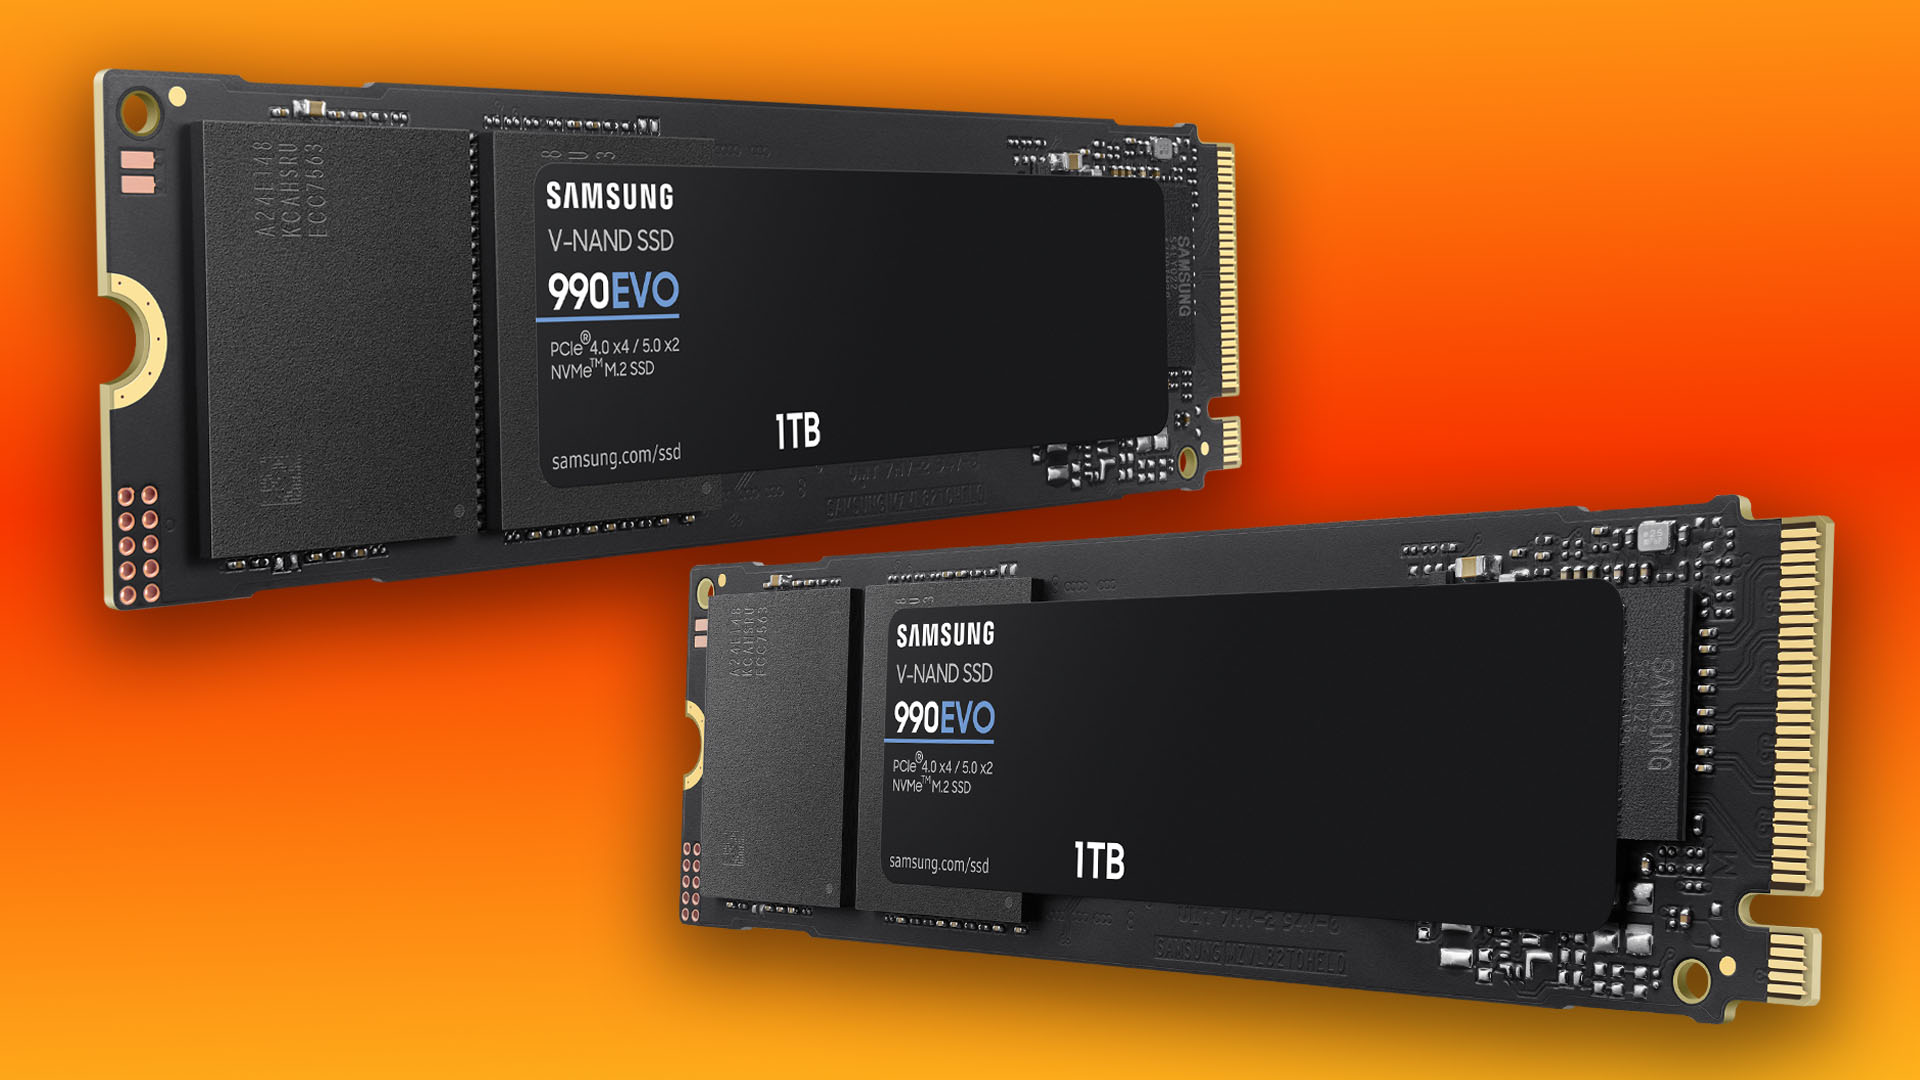 Samsung unleashes new budget SSD, but it's not what it seems